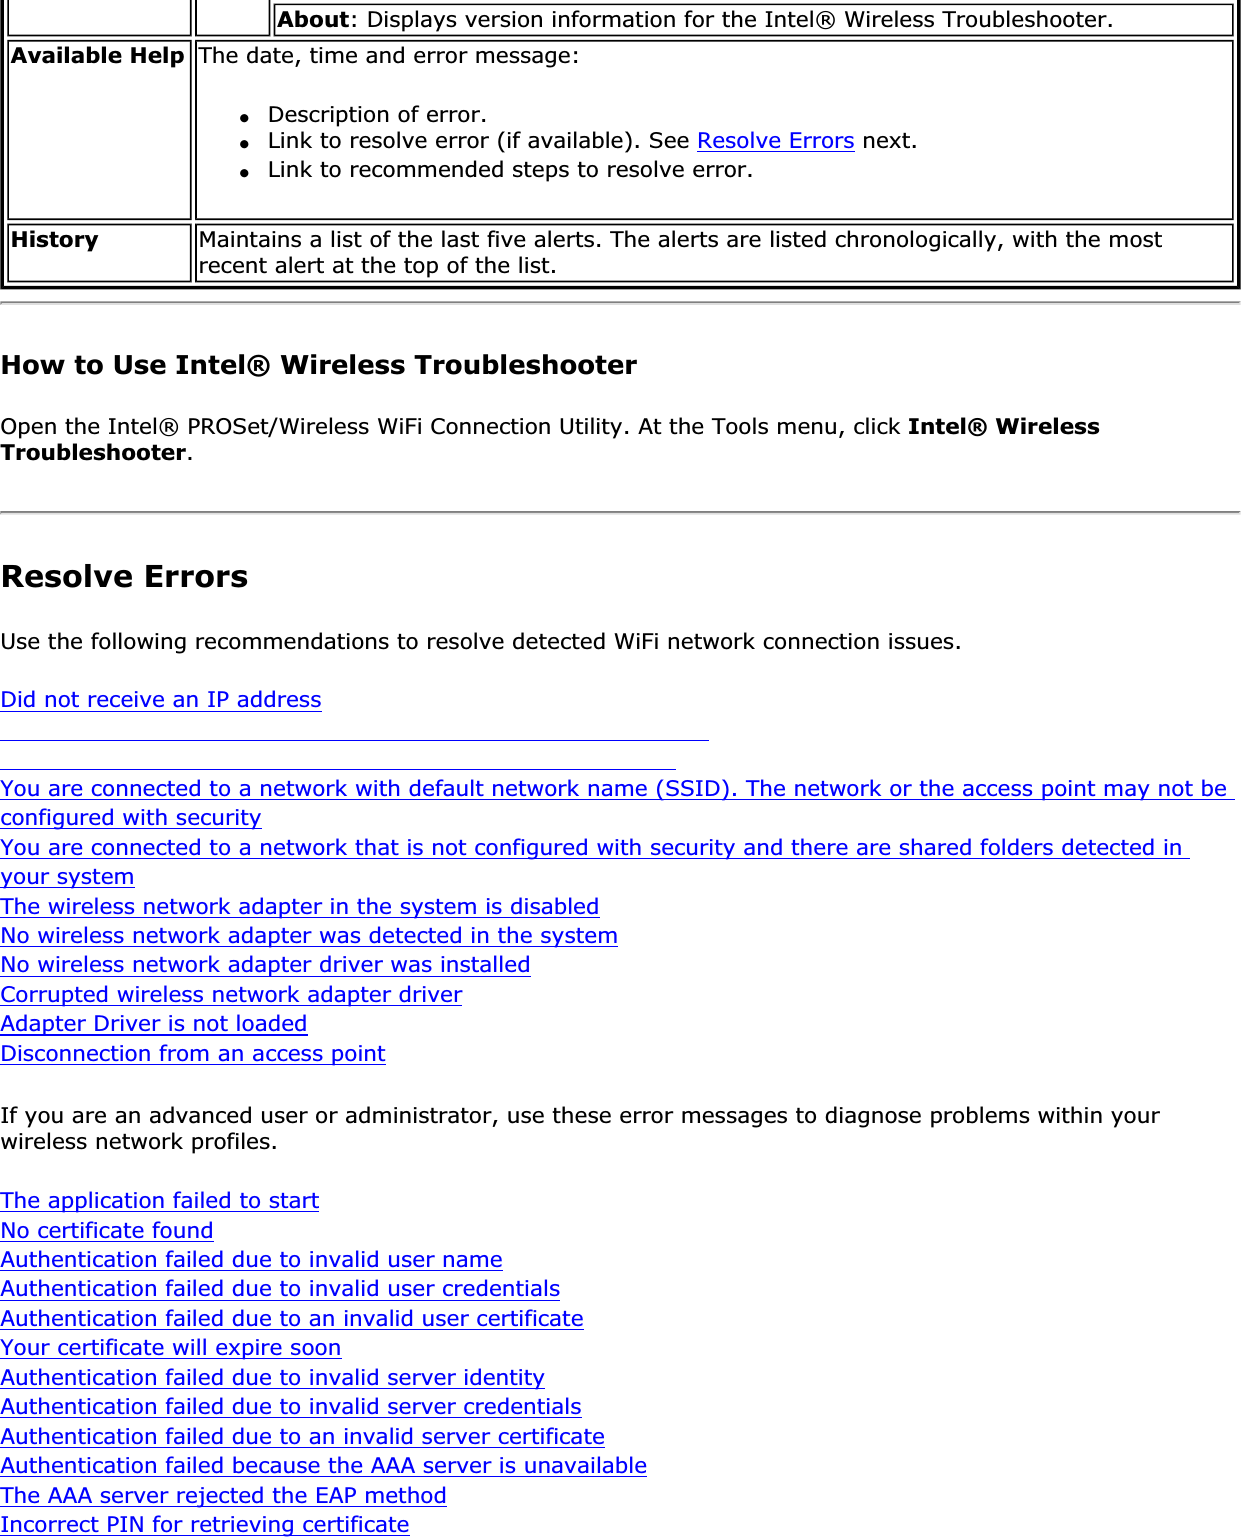 About: Displays version information for the Intel® Wireless Troubleshooter.Available Help The date, time and error message: ●Description of error.●Link to resolve error (if available). See Resolve Errors next.●Link to recommended steps to resolve error.History Maintains a list of the last five alerts. The alerts are listed chronologically, with the most recent alert at the top of the list.How to Use Intel® Wireless TroubleshooterOpen the Intel® PROSet/Wireless WiFi Connection Utility. At the Tools menu, click Intel® Wireless Troubleshooter.Resolve ErrorsUse the following recommendations to resolve detected WiFi network connection issues. Did not receive an IP addressYou are connected to a network with default network name (SSID). The network or the access point may not be configured with securityYou are connected to a network that is not configured with security and there are shared folders detected in your systemThe wireless network adapter in the system is disabledNo wireless network adapter was detected in the systemNo wireless network adapter driver was installedCorrupted wireless network adapter driverAdapter Driver is not loadedDisconnection from an access pointIf you are an advanced user or administrator, use these error messages to diagnose problems within your wireless network profiles. The application failed to startNo certificate foundAuthentication failed due to invalid user nameAuthentication failed due to invalid user credentialsAuthentication failed due to an invalid user certificateYour certificate will expire soonAuthentication failed due to invalid server identityAuthentication failed due to invalid server credentialsAuthentication failed due to an invalid server certificateAuthentication failed because the AAA server is unavailableThe AAA server rejected the EAP methodIncorrect PIN for retrieving certificate